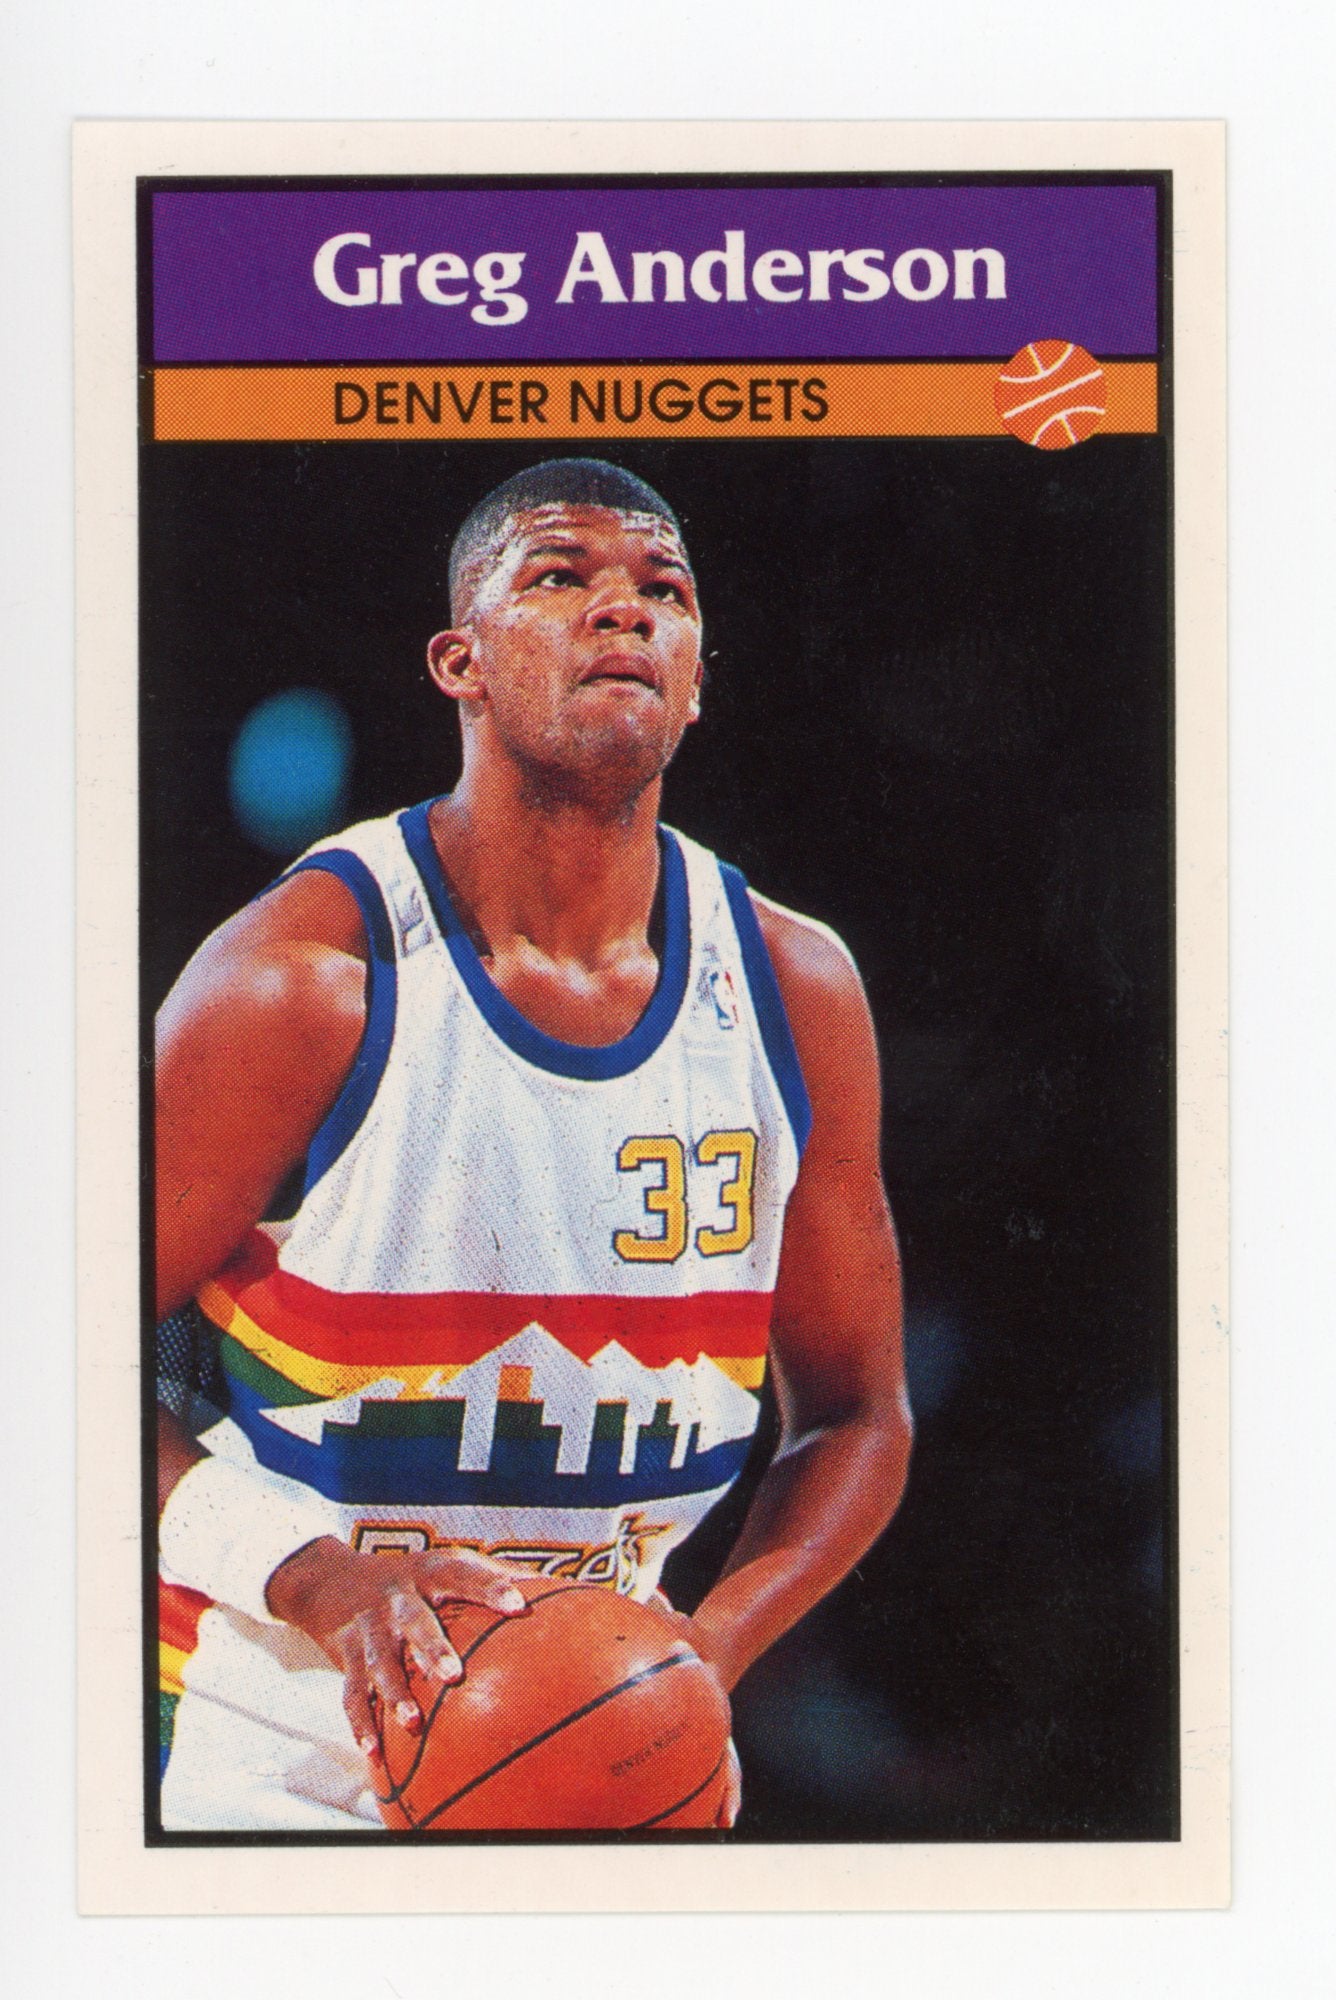 Mutombo, Dikembe / Denver Nuggets, Panini #71, Basketball Trading Card, 1992-93, Sticker Card, Italy, Hall of Famer